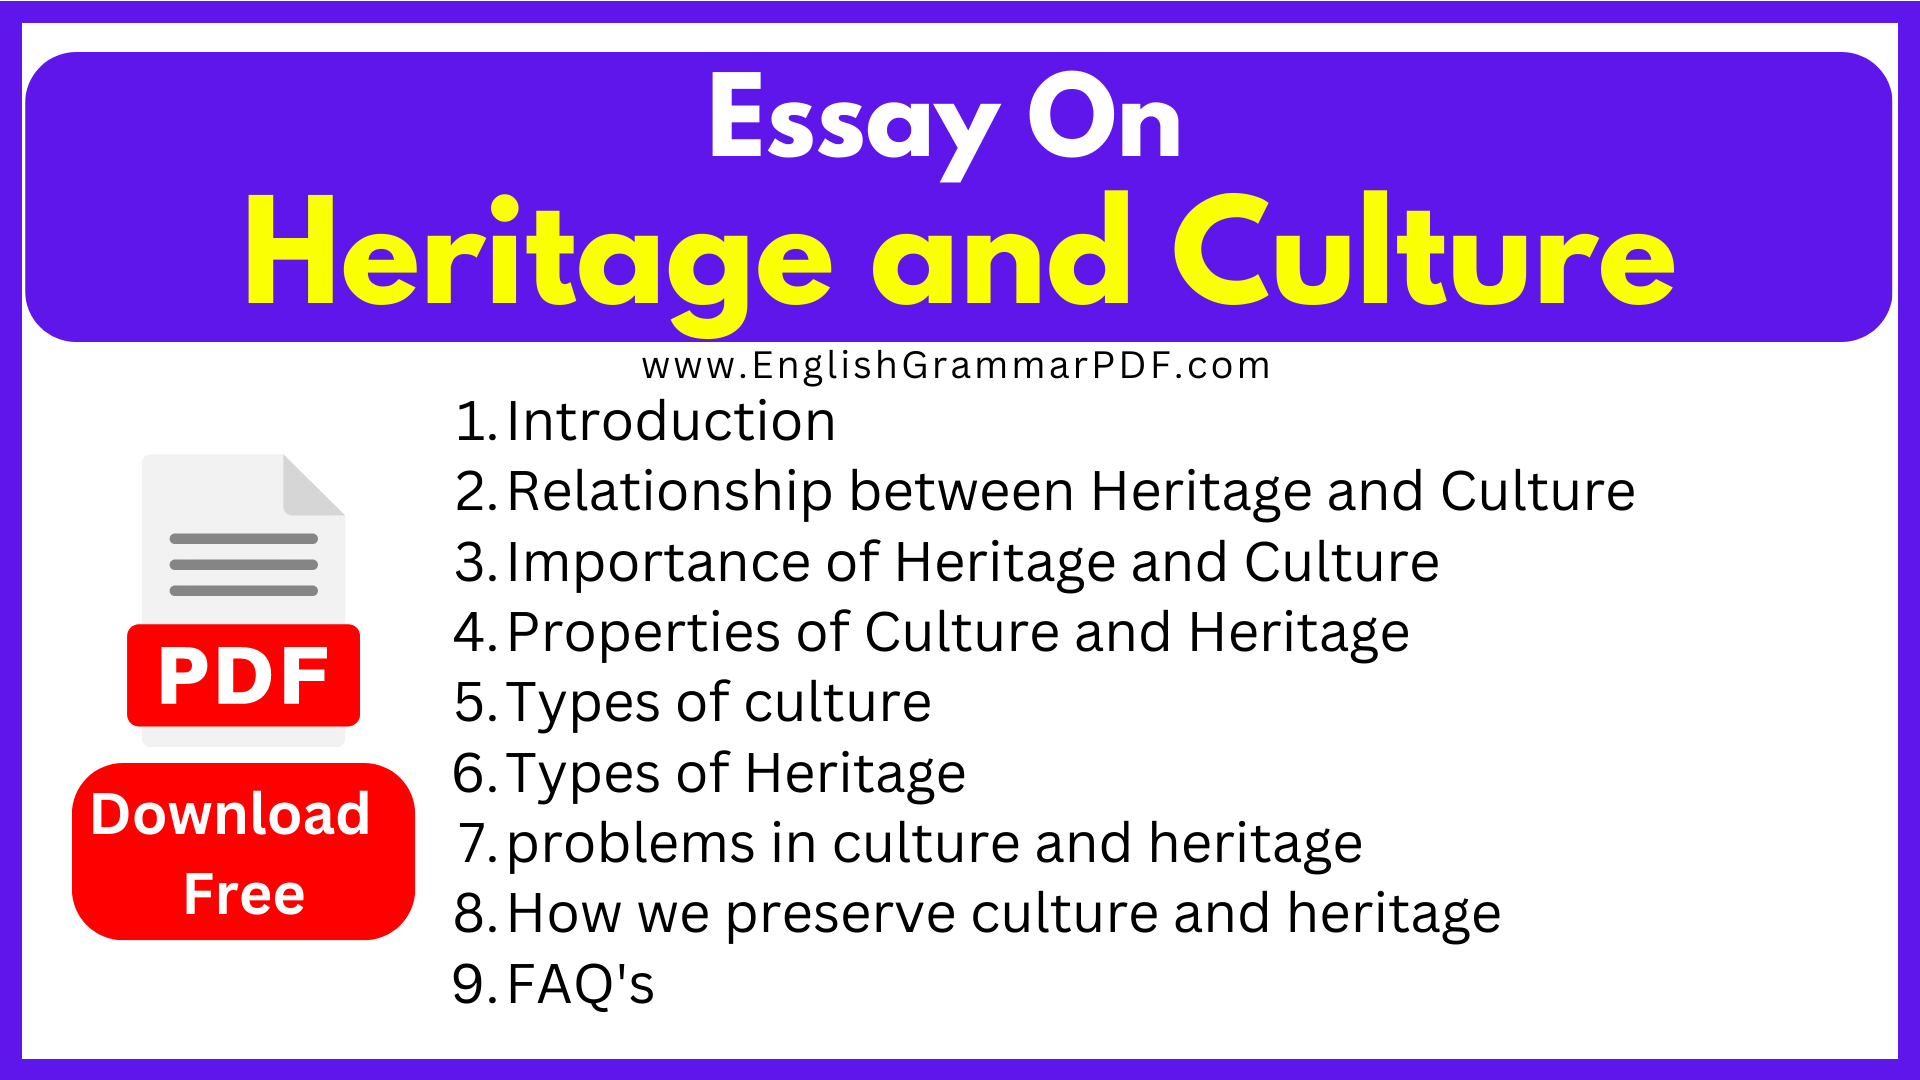 Essay On Heritage and Culture